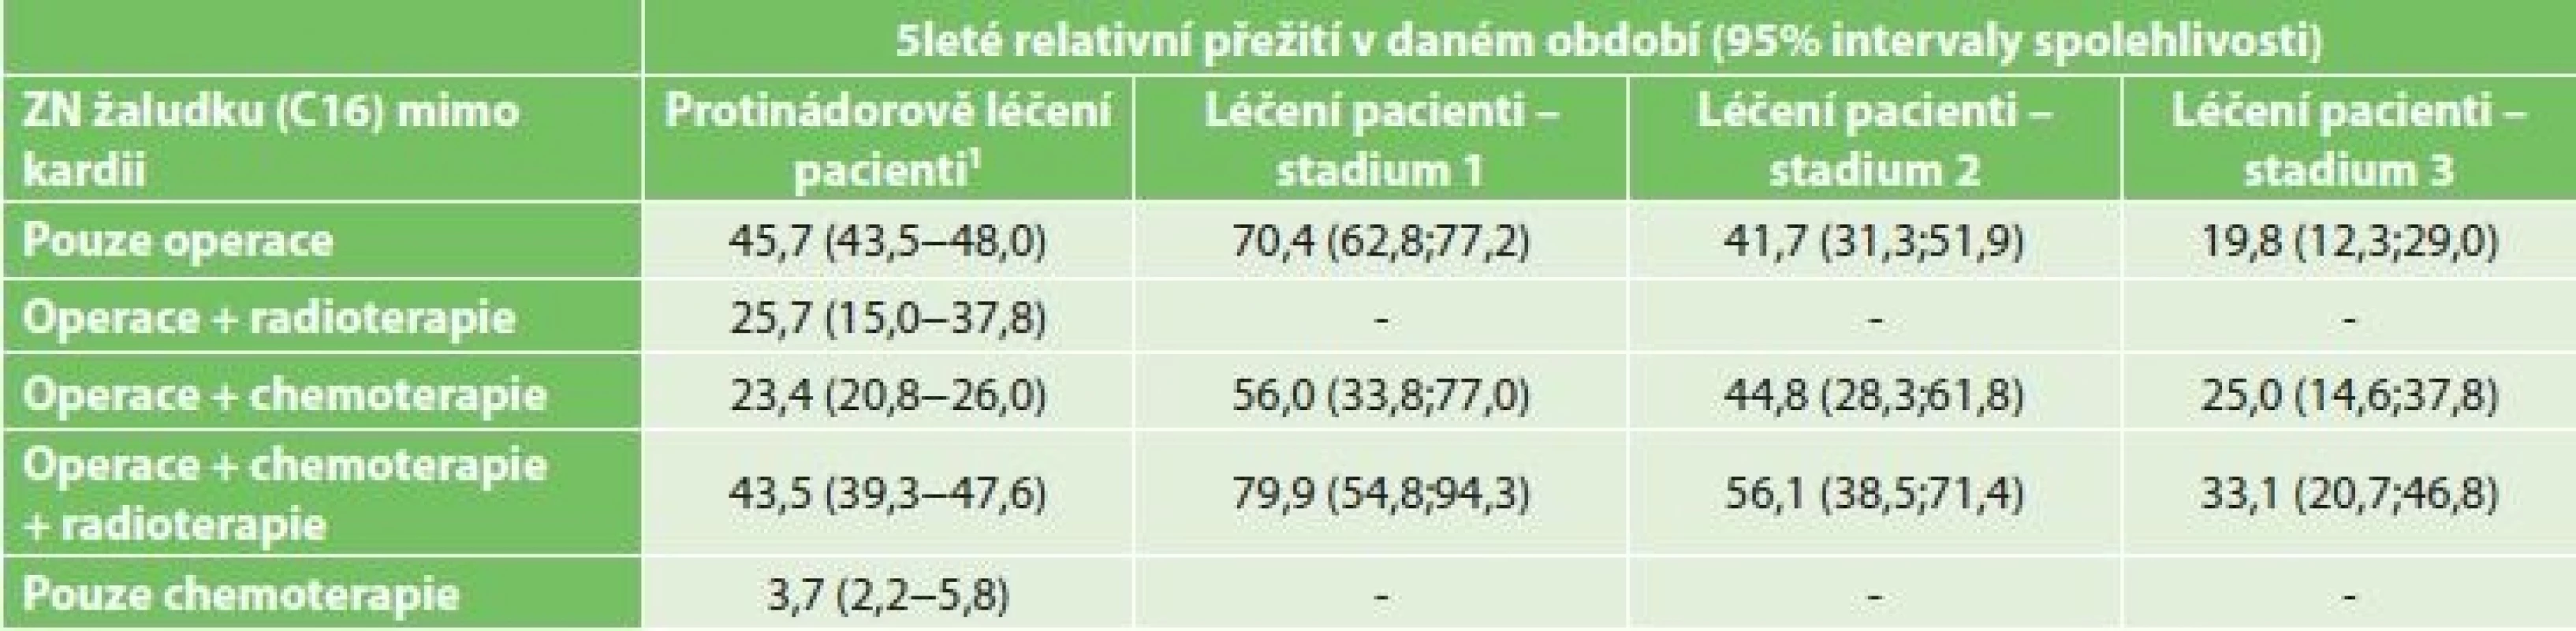 5leté relativní přežití karcinomu žaludku (mimo kardii) dle typu léčby a stadia onemocnění období 2004−2013<br>
Tab. 5: Five-year relative survival rate for stomach cancer (excluding the cardia), based of the type of treatment and
disease stage in the years 2004−2013